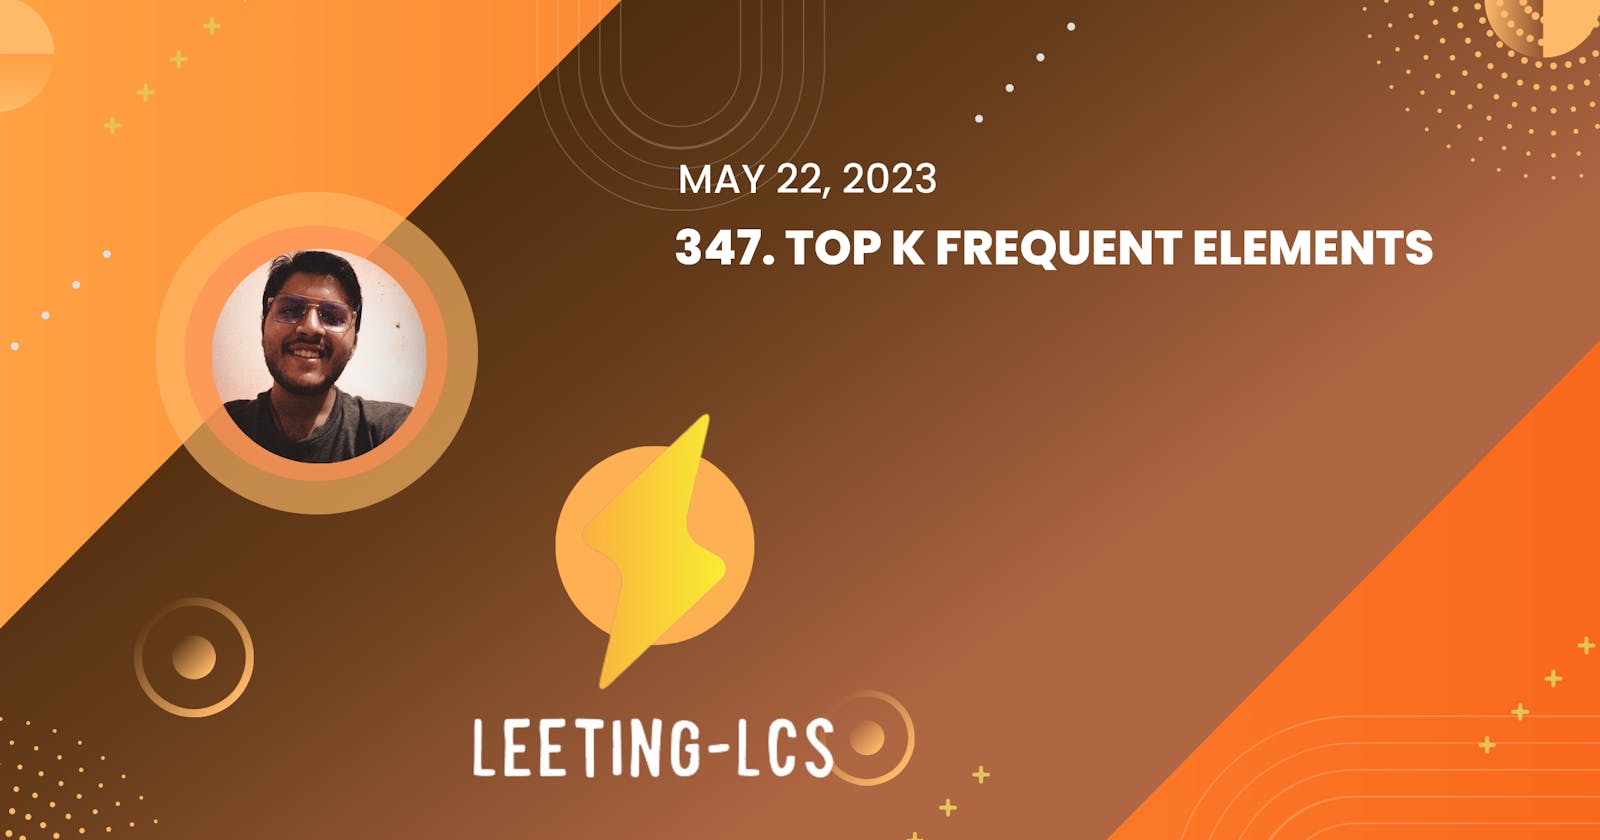 Top K Frequent Elements